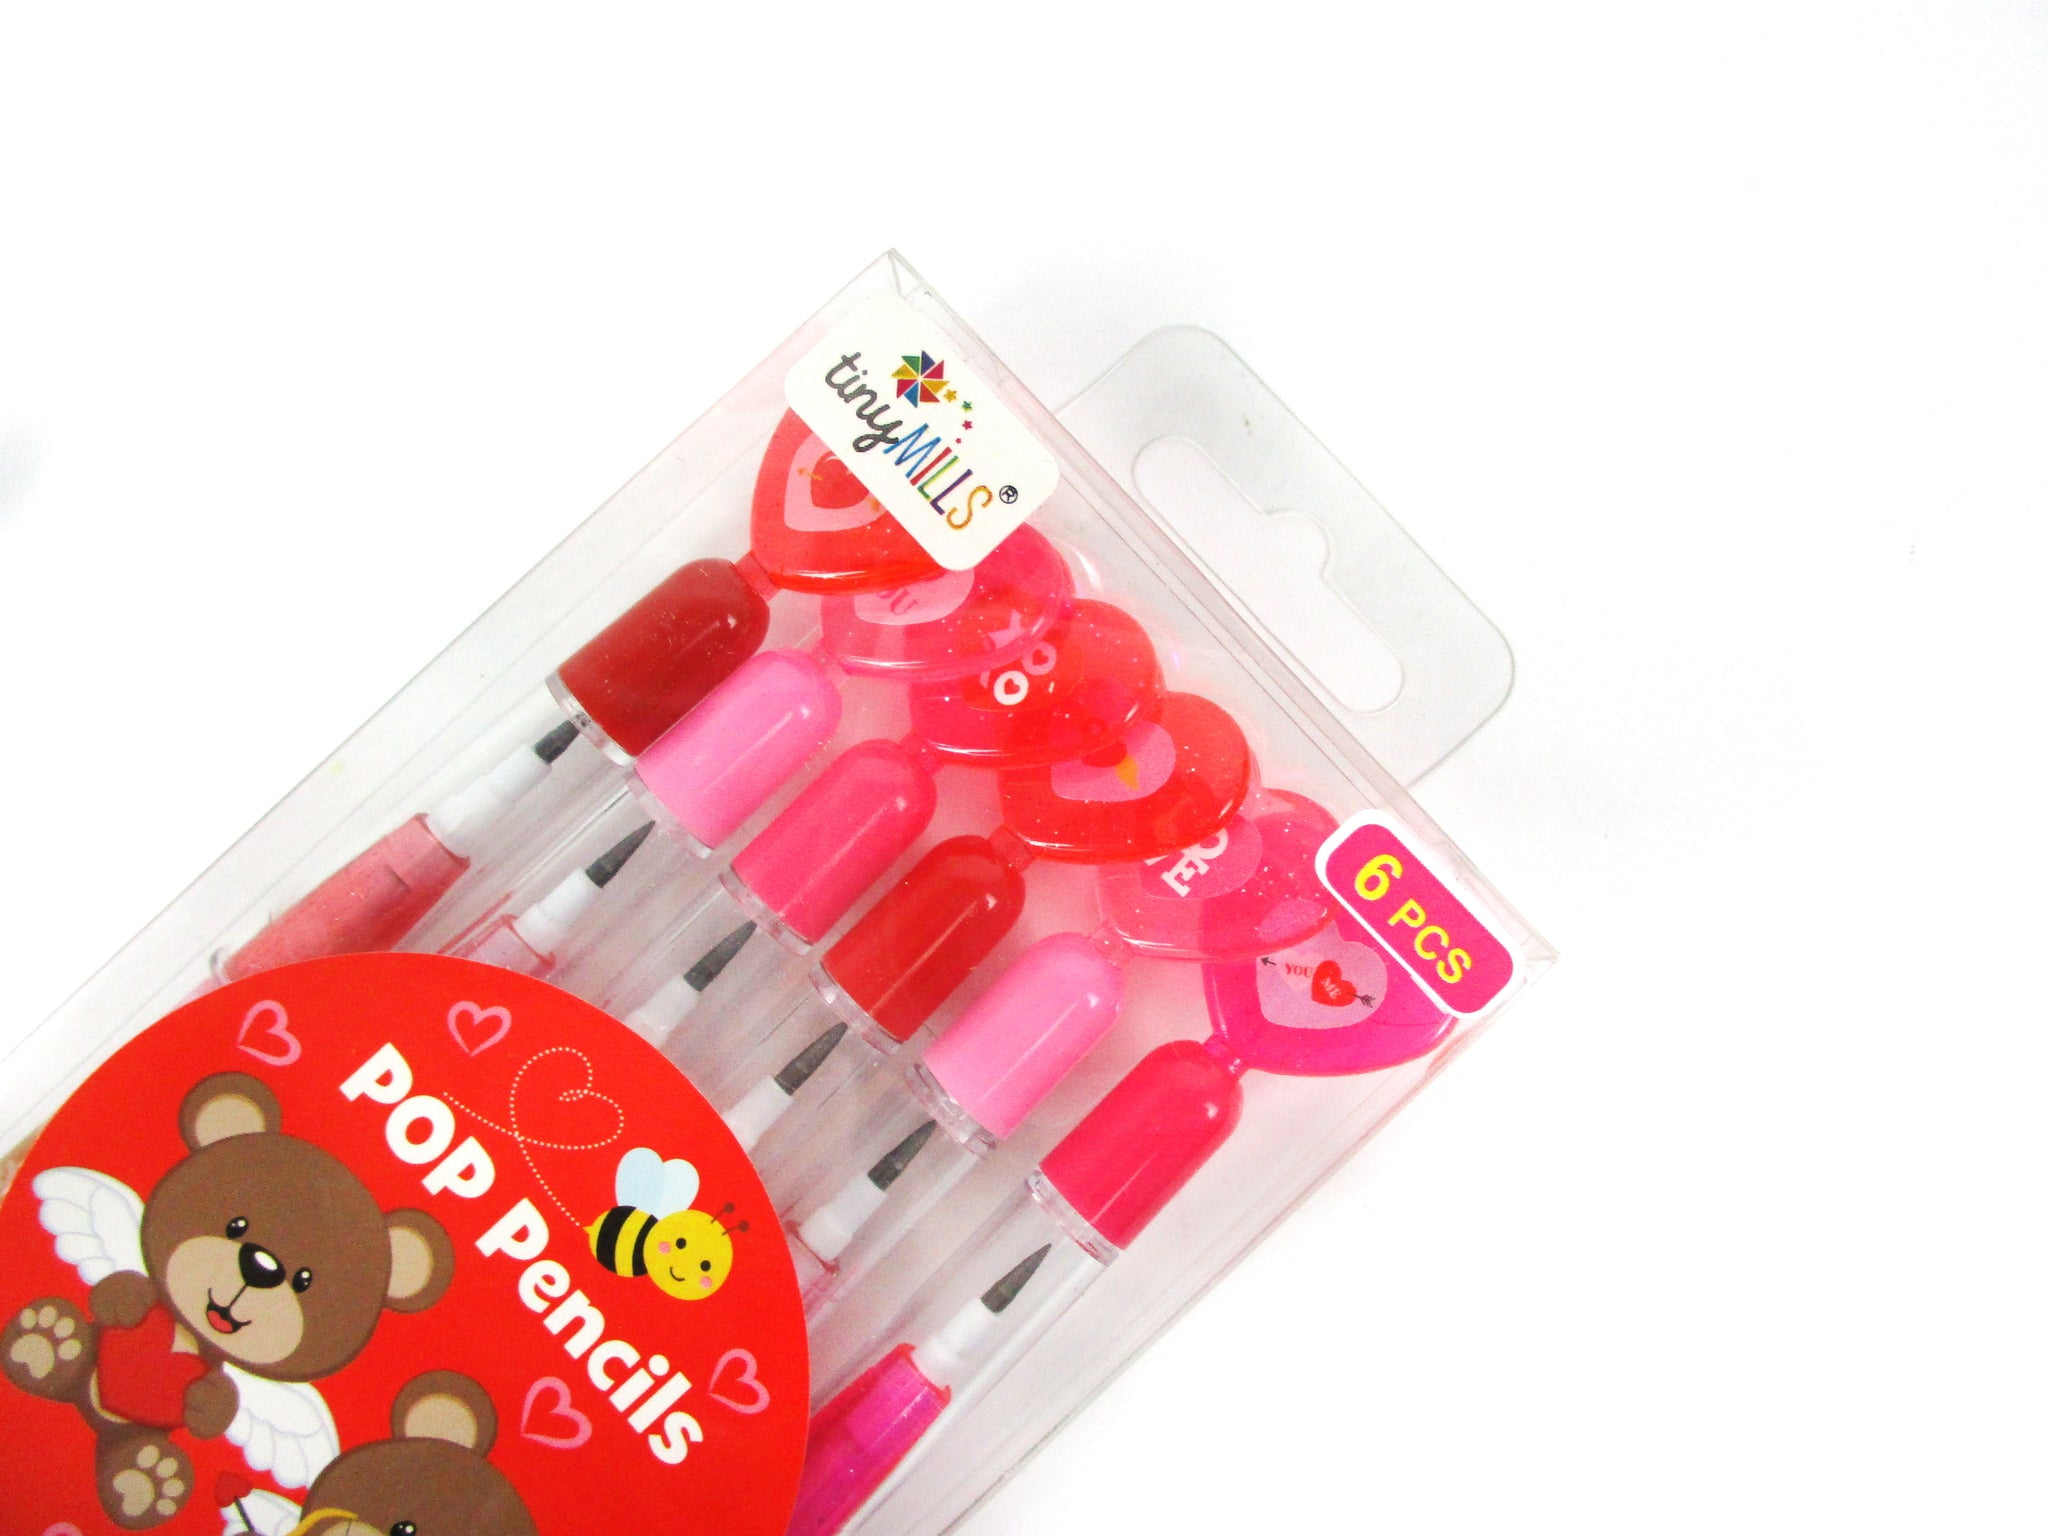 TINYMILLS 24 Pcs Valentine's Day Heart Multi Point Pencils Party